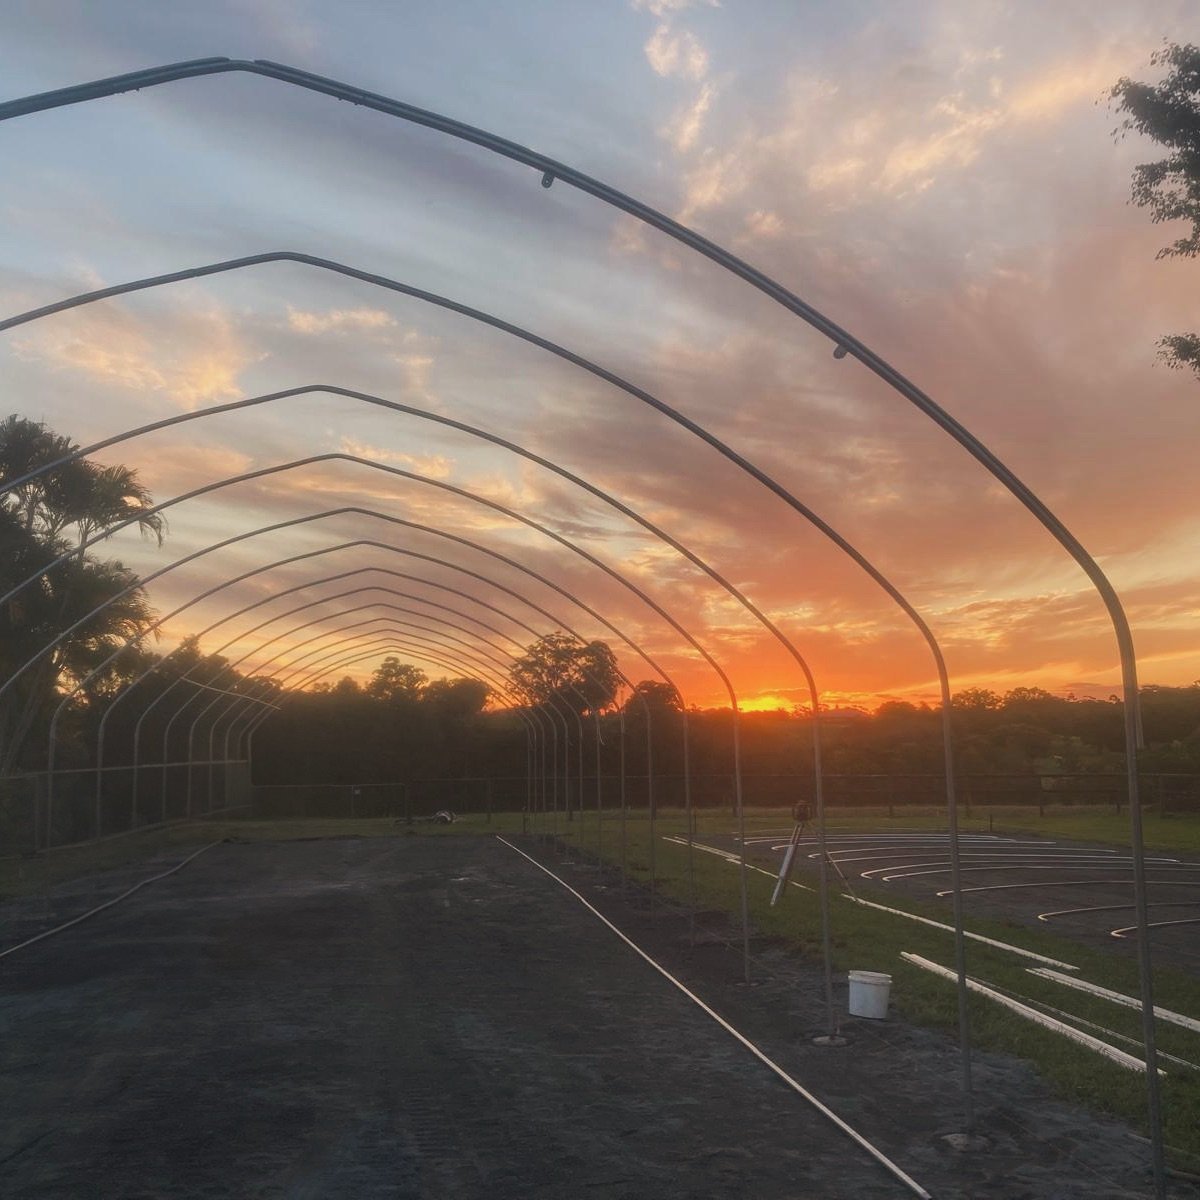 Rounding out a great week with another #growtunnel build on the Sunshine Coast. This tunnel is going to be full of lush microgreens in no time. 

Looking to grow your own food, establish a market, nurture seedlings or create your own microgreen endea